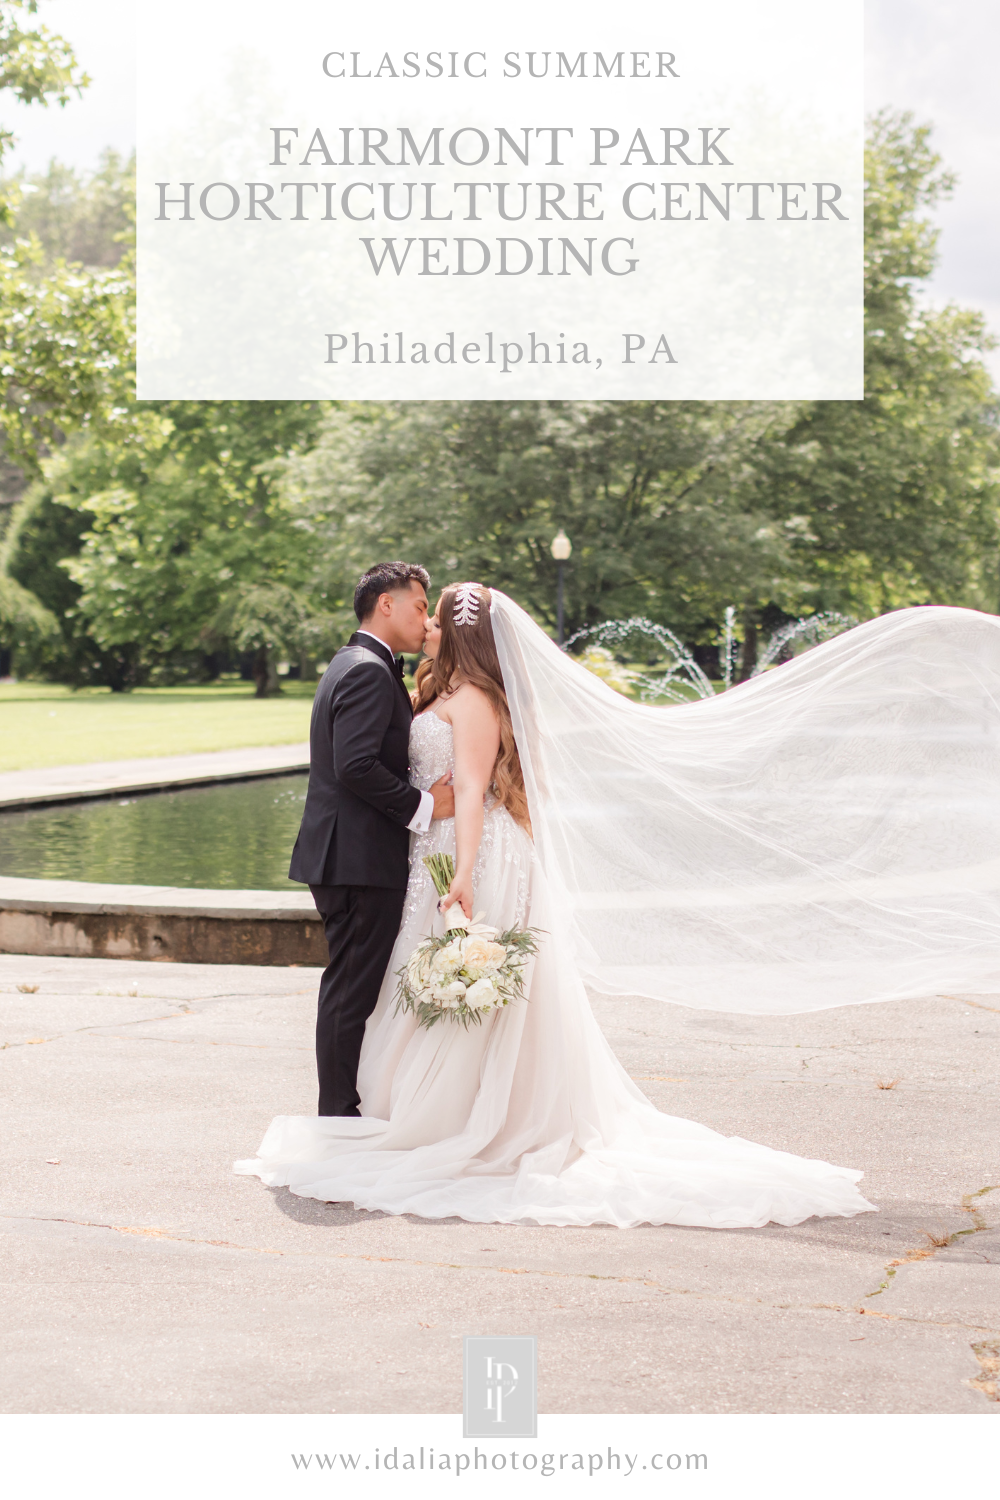 Fairmont Park Horticulture Center wedding featuring a greenhouse ceremony photographed by NJ wedding photographer Idalia Photography